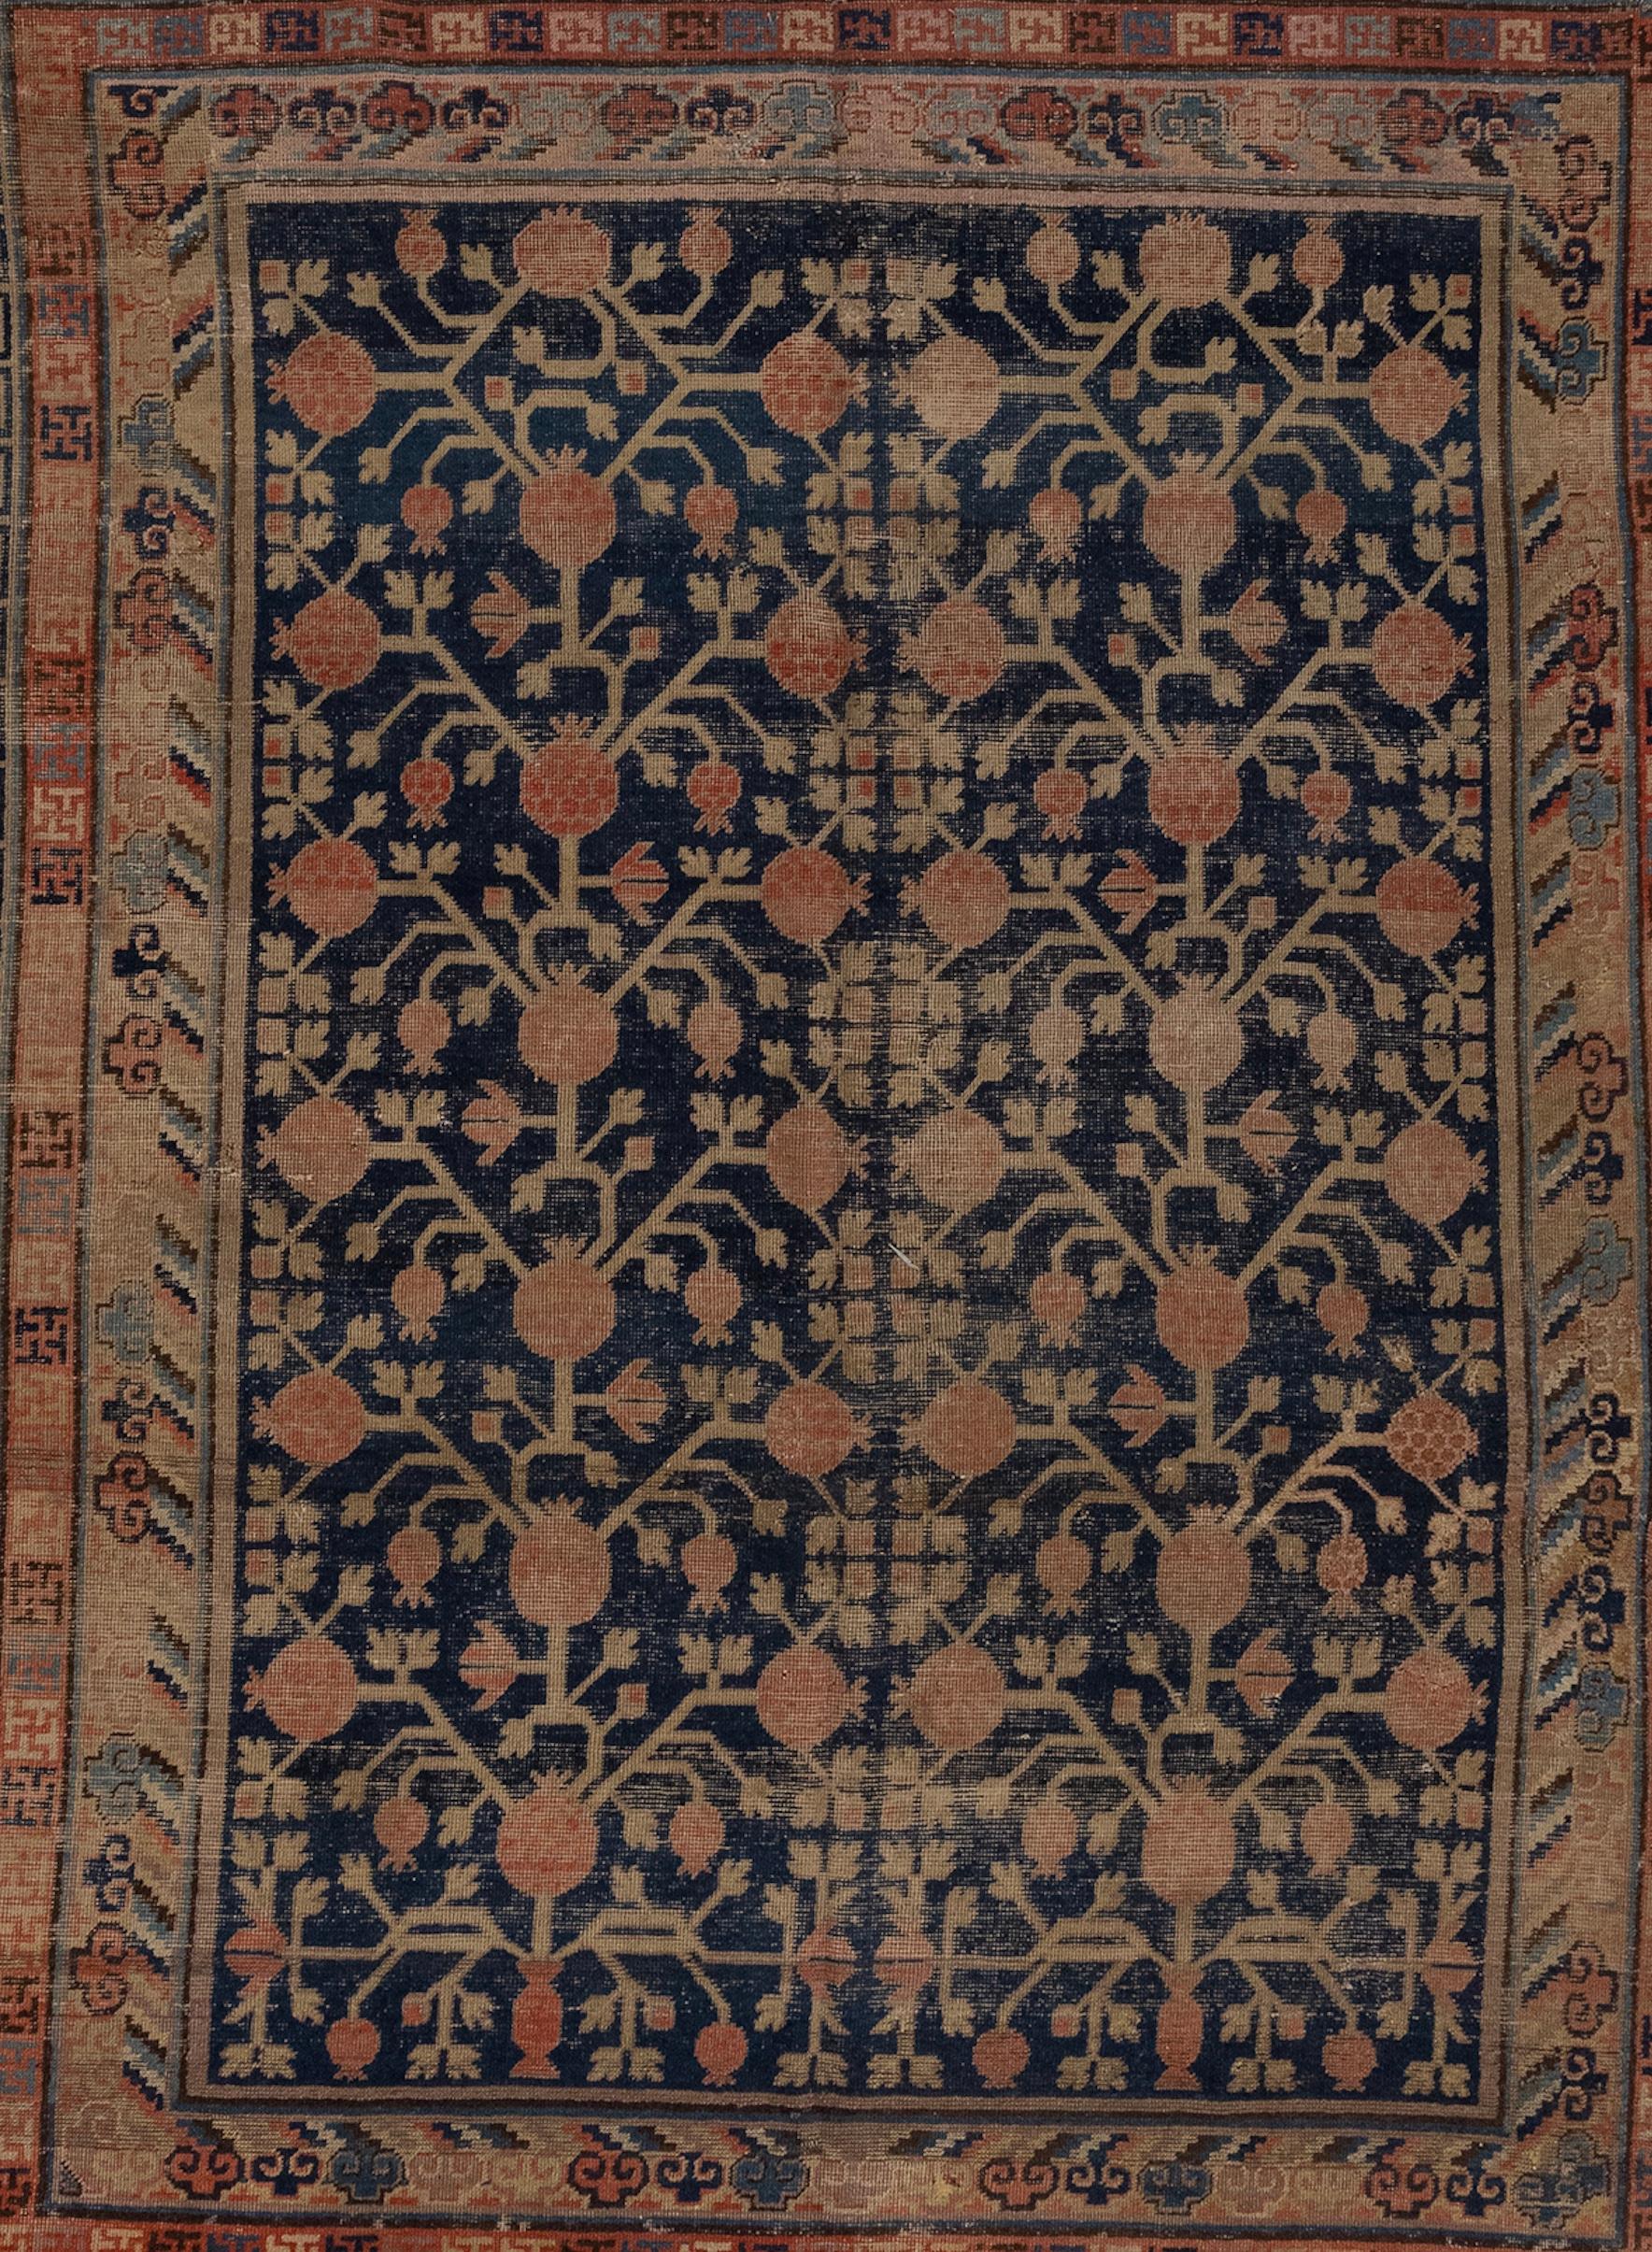 Late 19th century East Turkistan Khotan rug with pomegranate design.